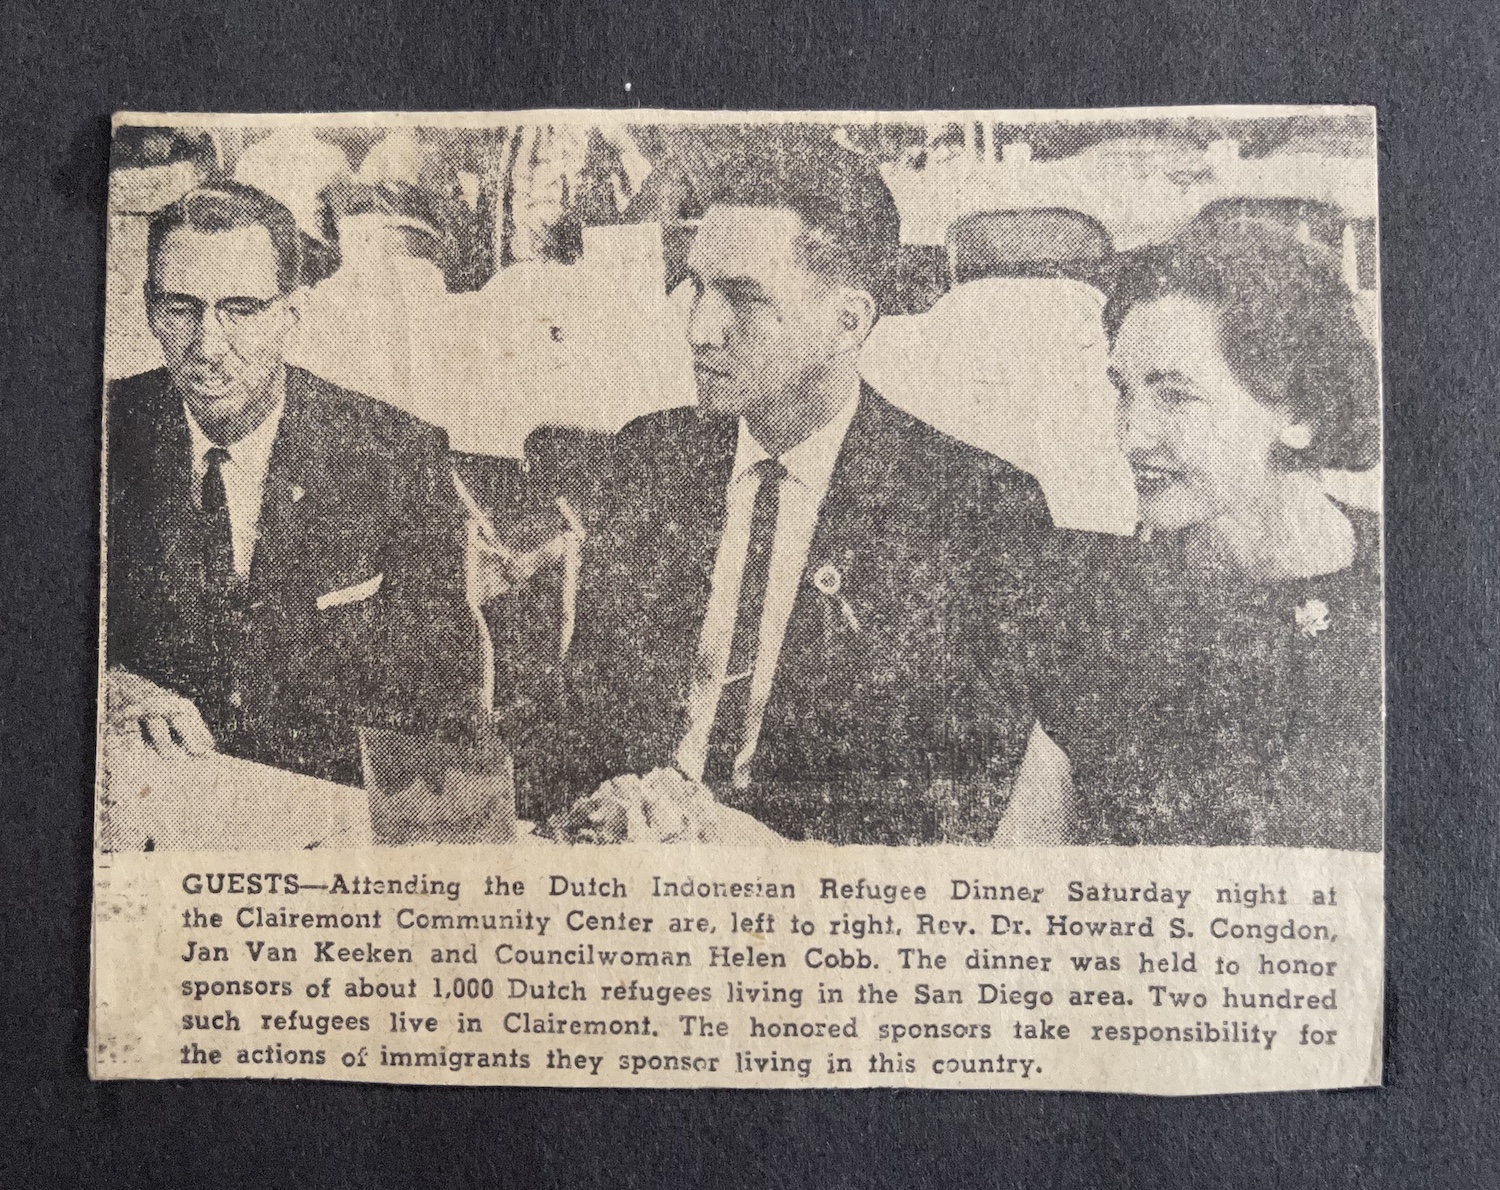 Historical newspaper article featuring the Dutch Indonesian Refugee Dinner at Clairemont Community Center